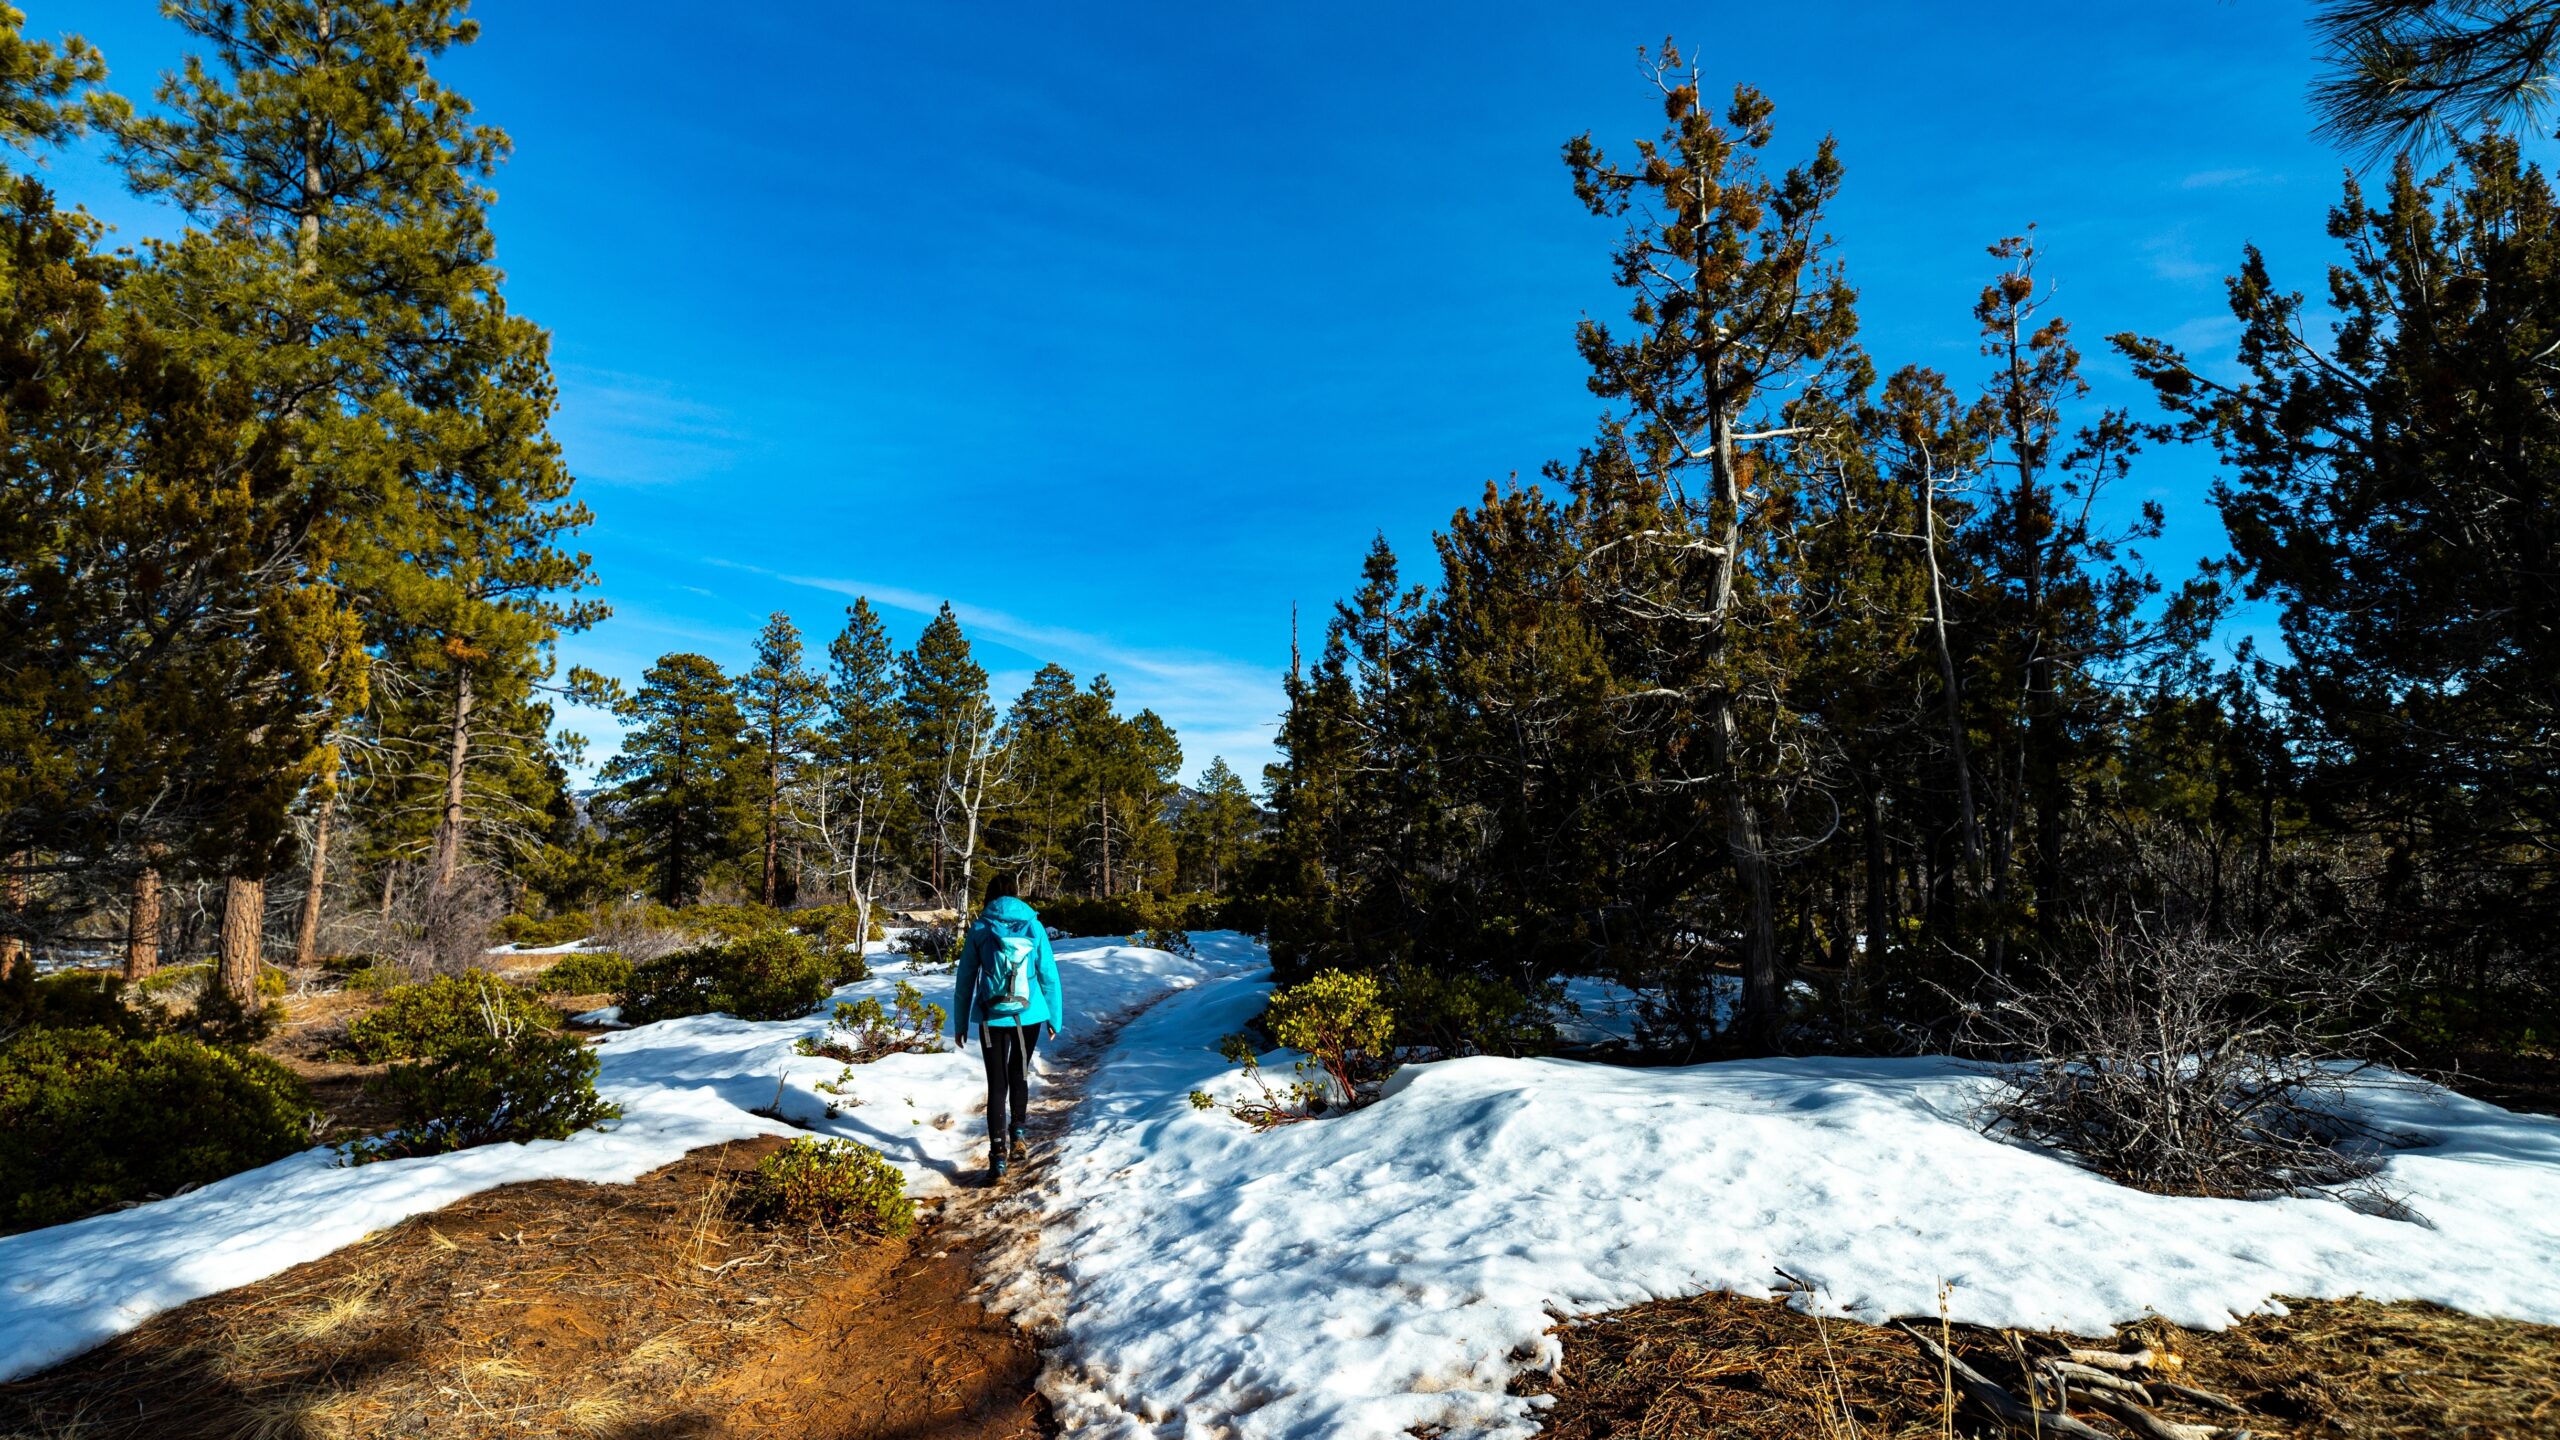 View of a person in a blue jacket with their back to the camera walking through a snowy pine forest in Zion National Park